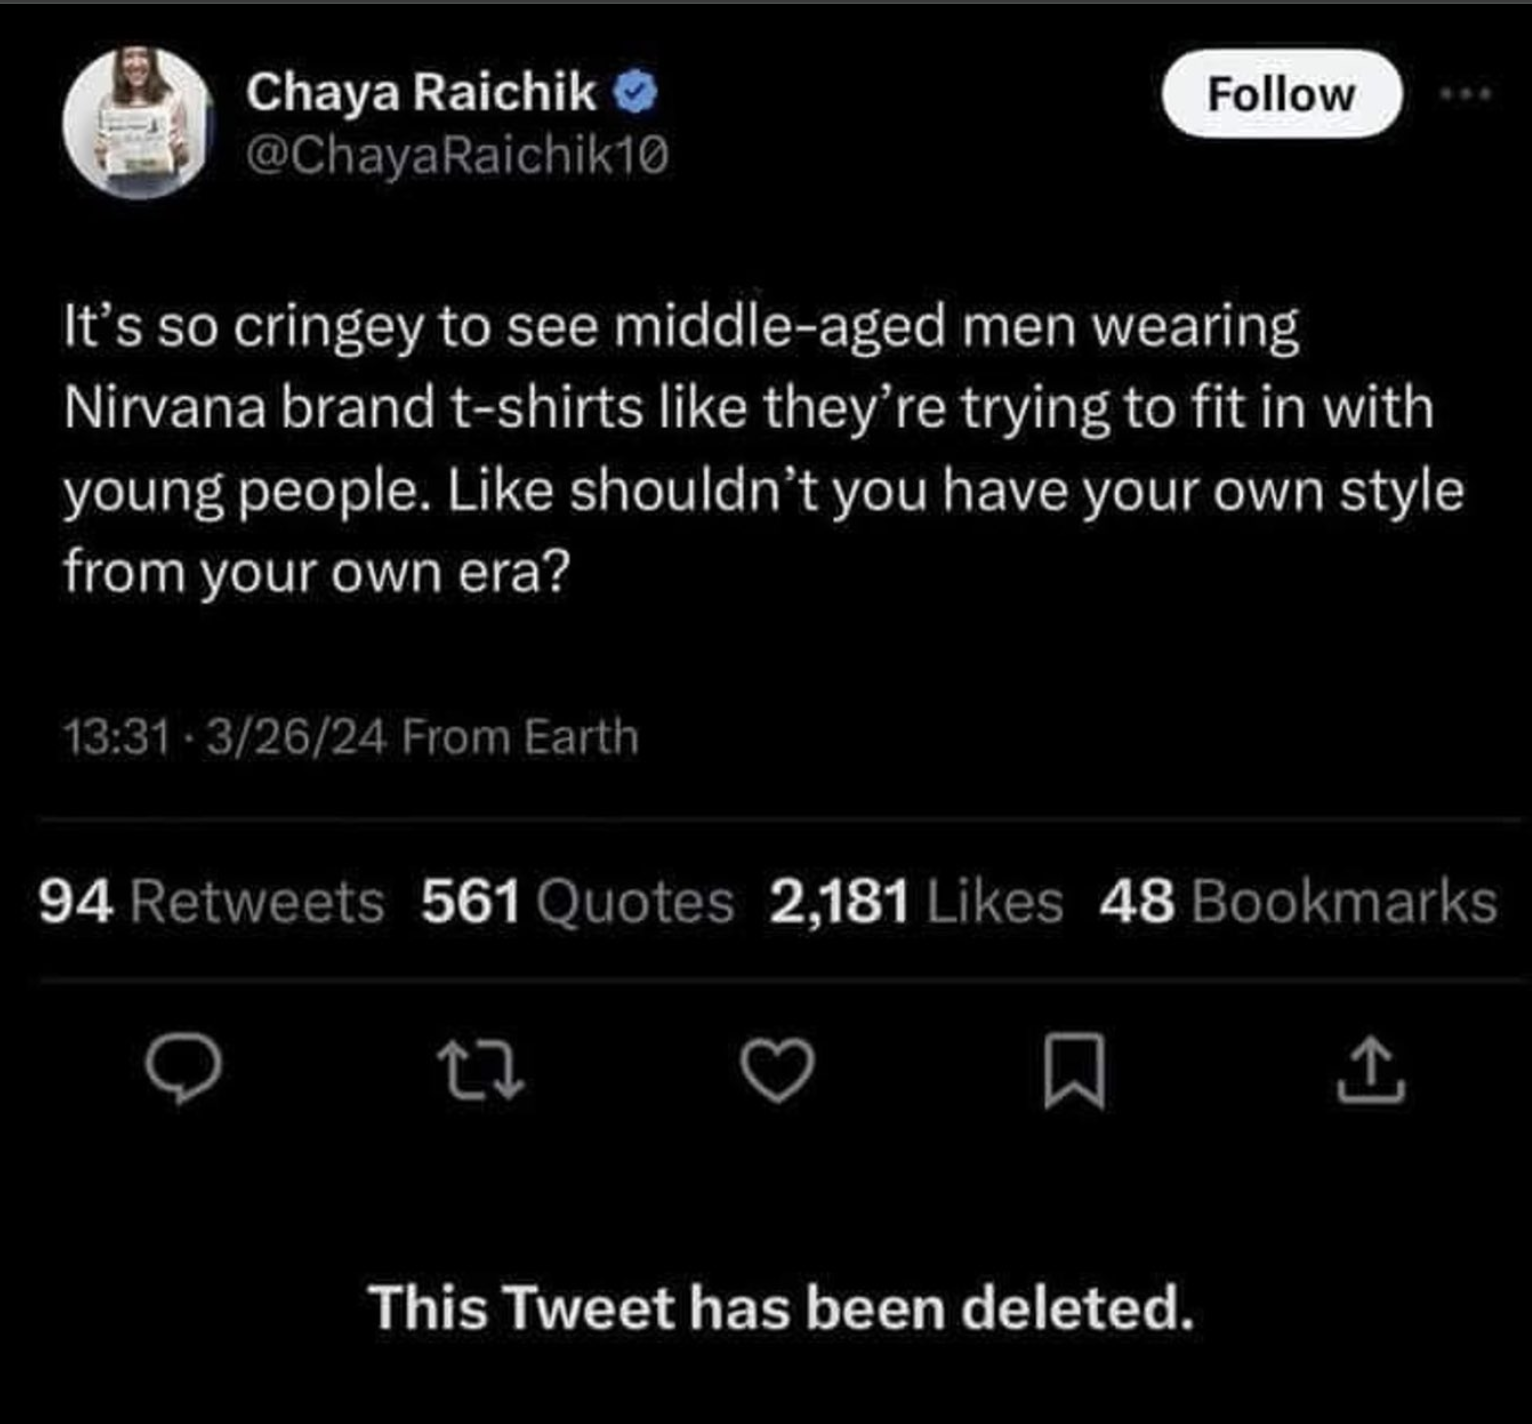 screenshot - Chaya Raichik It's so cringey to see middleaged men wearing Nirvana brand tshirts they're trying to fit in with young people. shouldn't you have your own style from your own era? 32624 From Earth 94 561 Quotes 2,181 48 Bookmarks 27 This Tweet